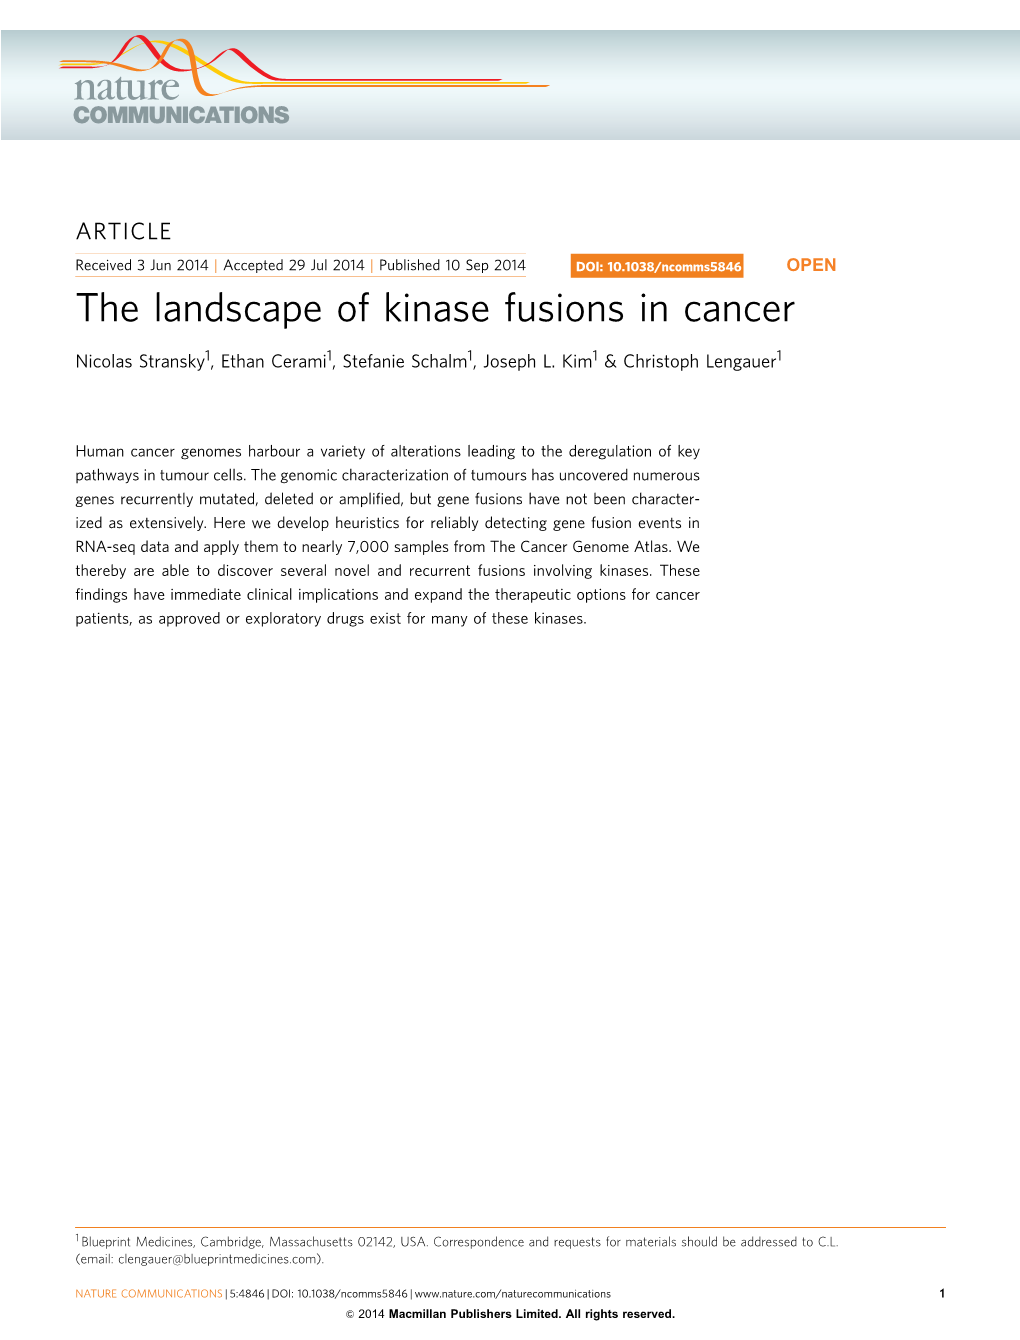 The Landscape of Kinase Fusions in Cancer